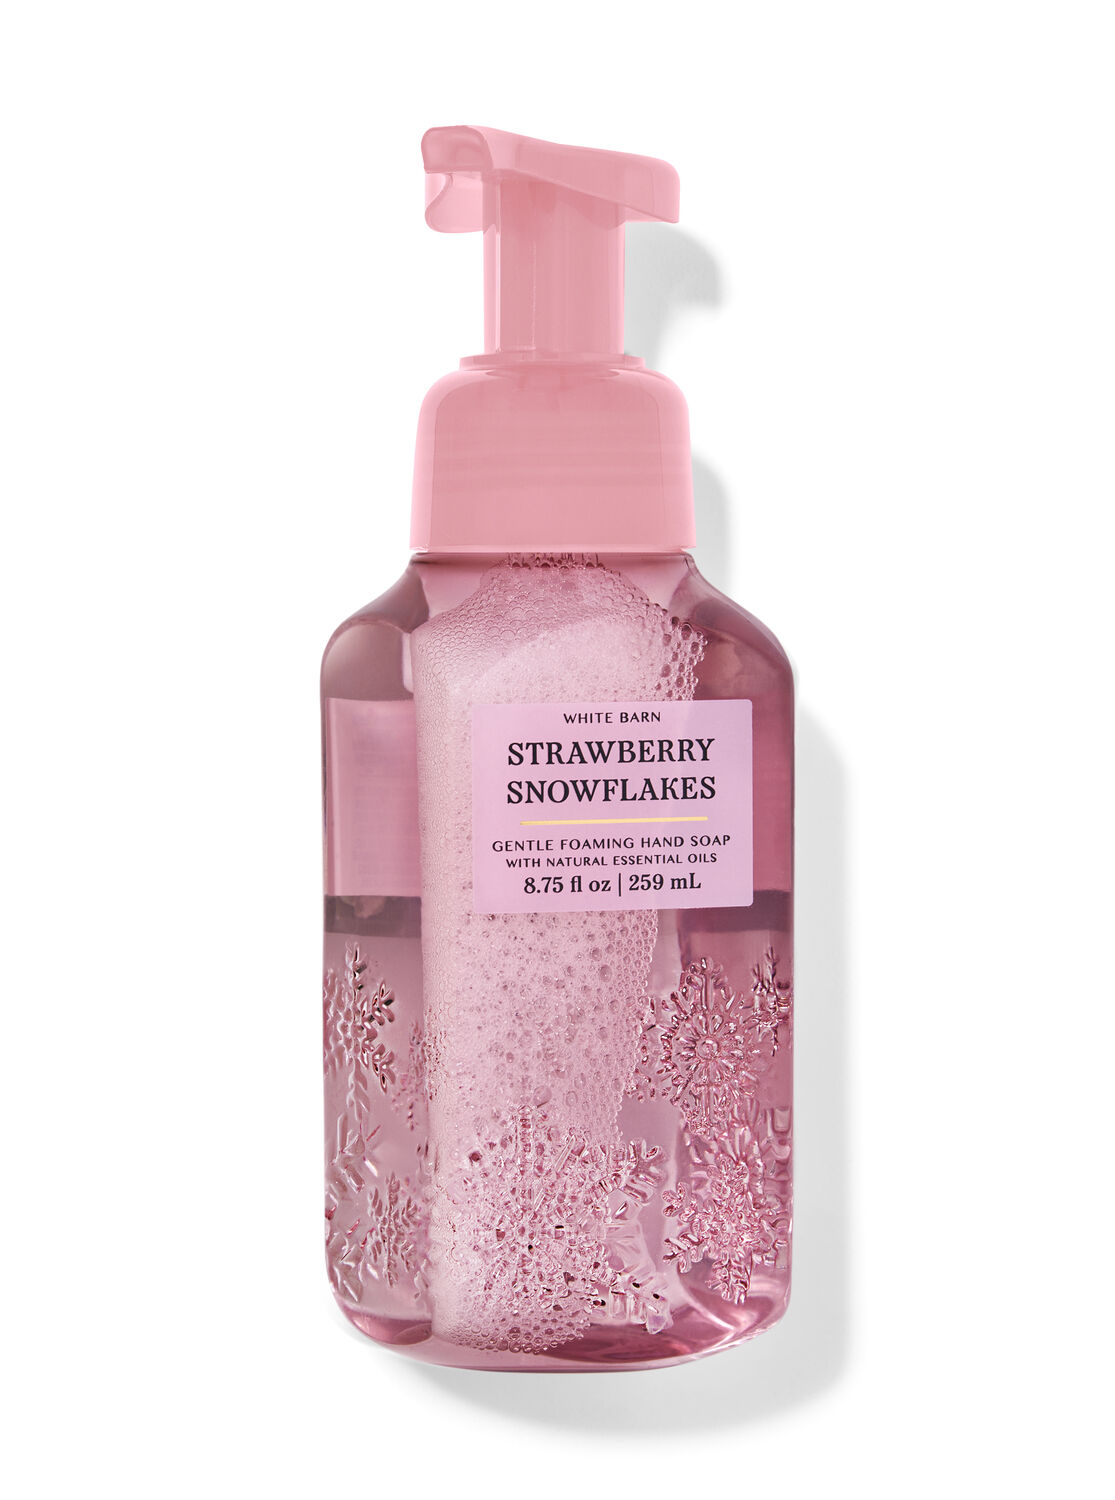 Strawberry Snowflakes Gentle Foaming Hand Soap